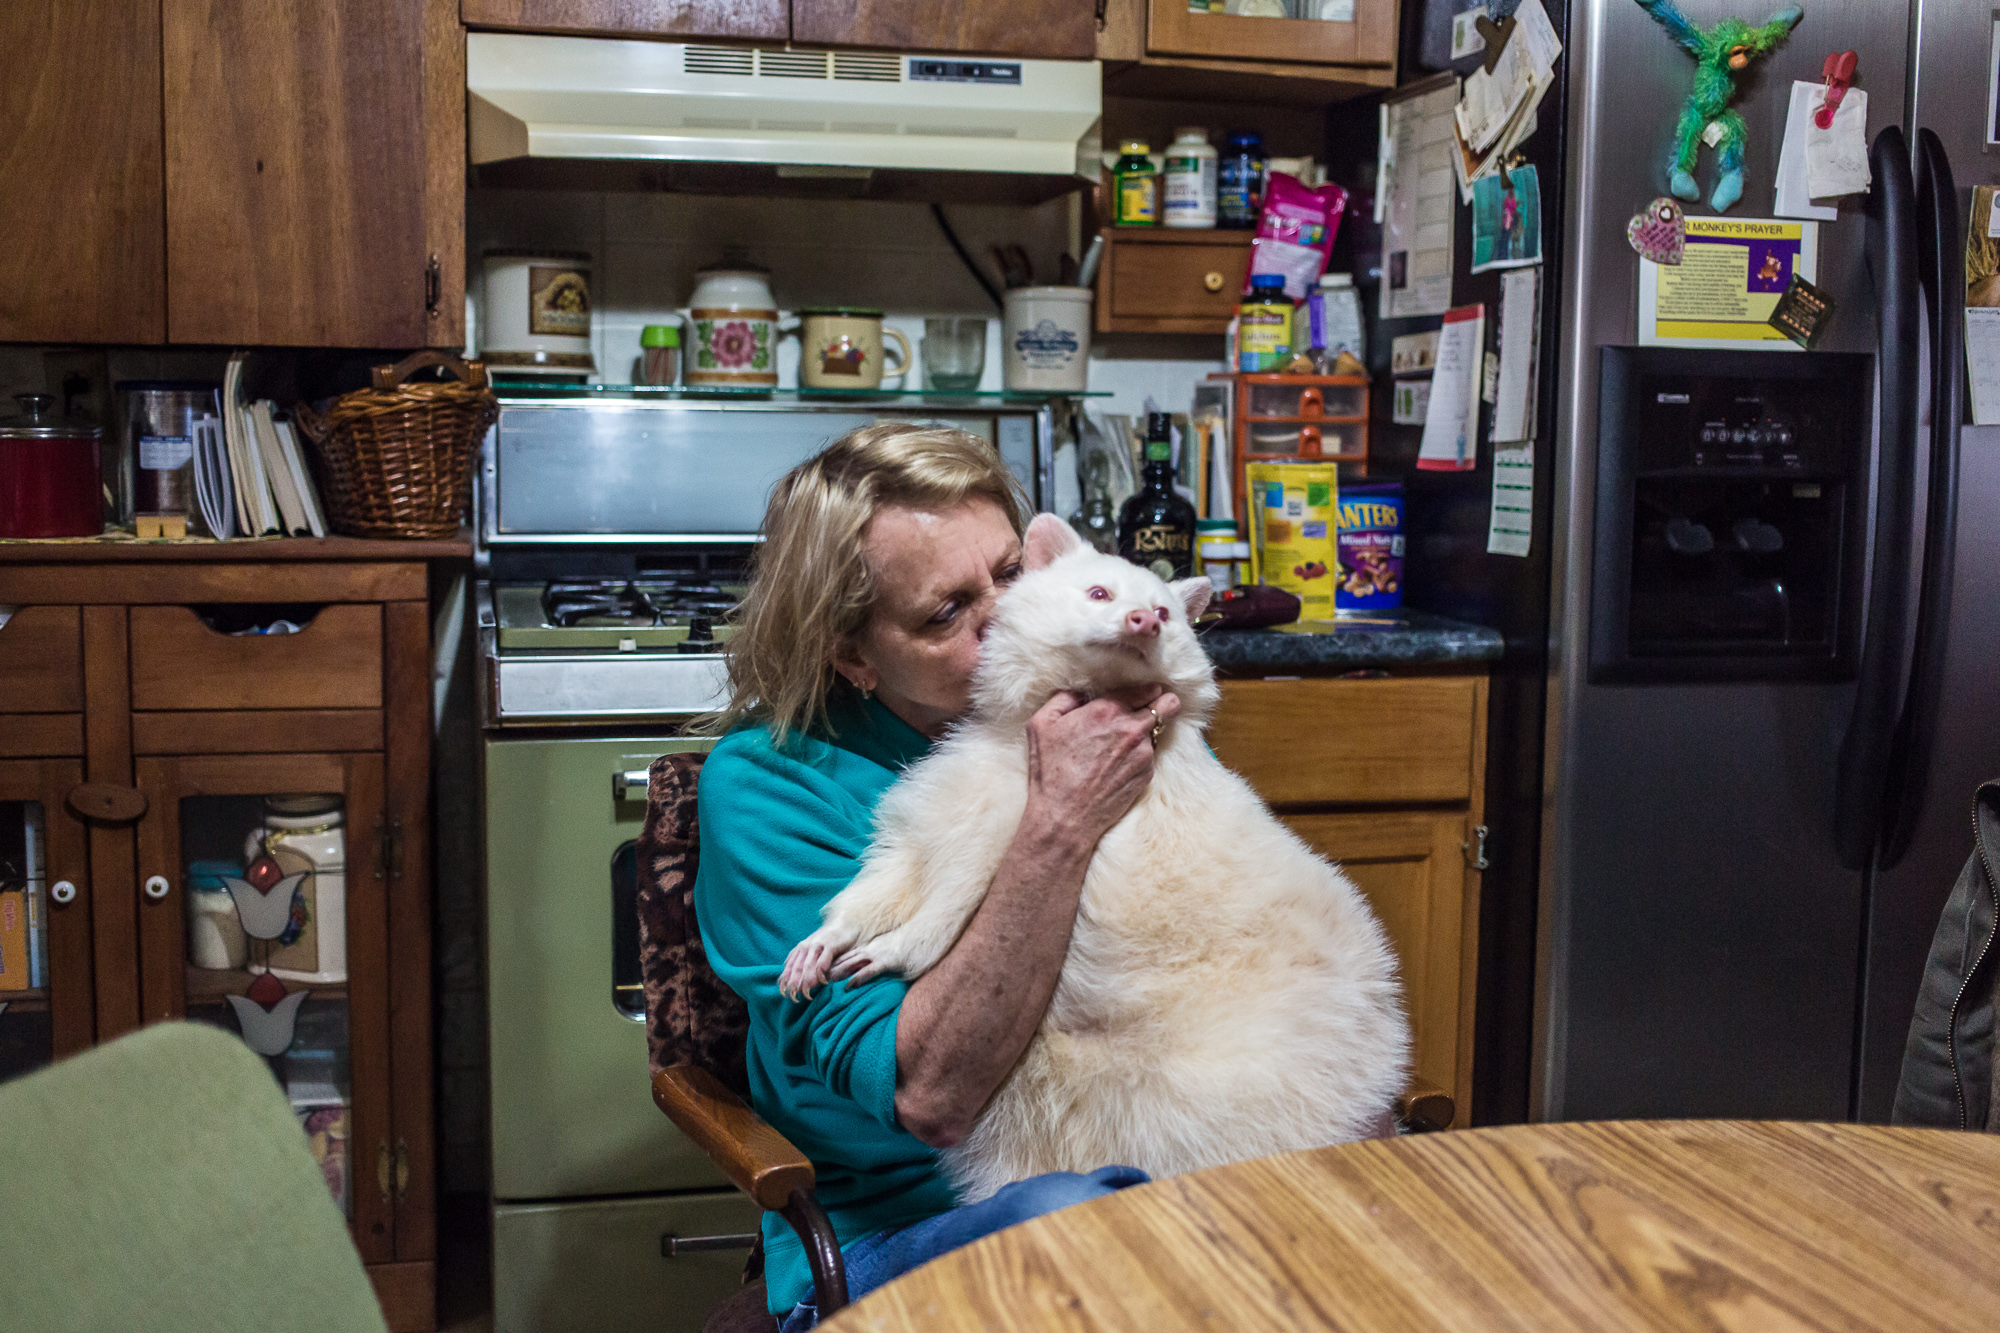  Trish Backer holds her pet albino raccoon Reba in her kitchen on Sunday, November 11, 2012 in Webster City, IA. 